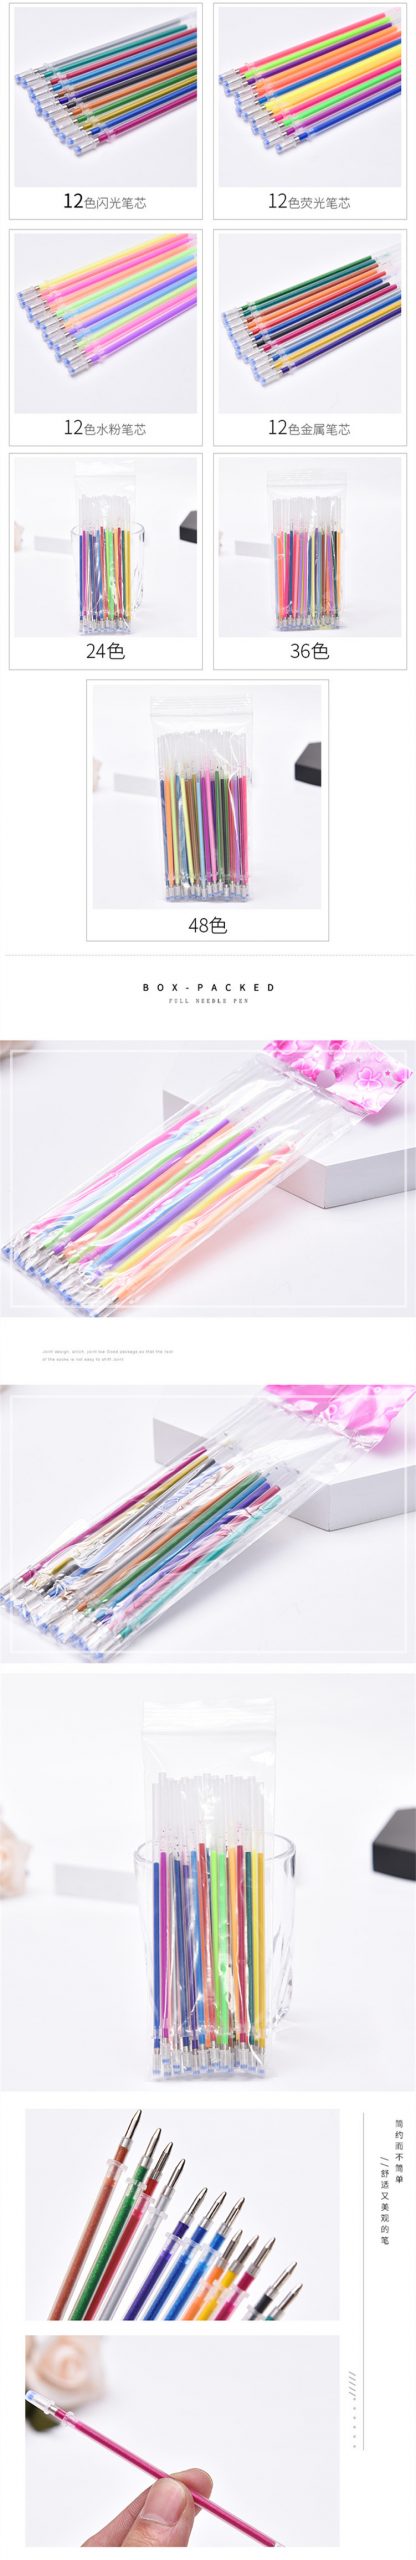 12/24/36/48 Color Gel Pen Refills Set Glitter Multi Colored Painting Writing Pen Refill Rod for handle School Stationery Tool